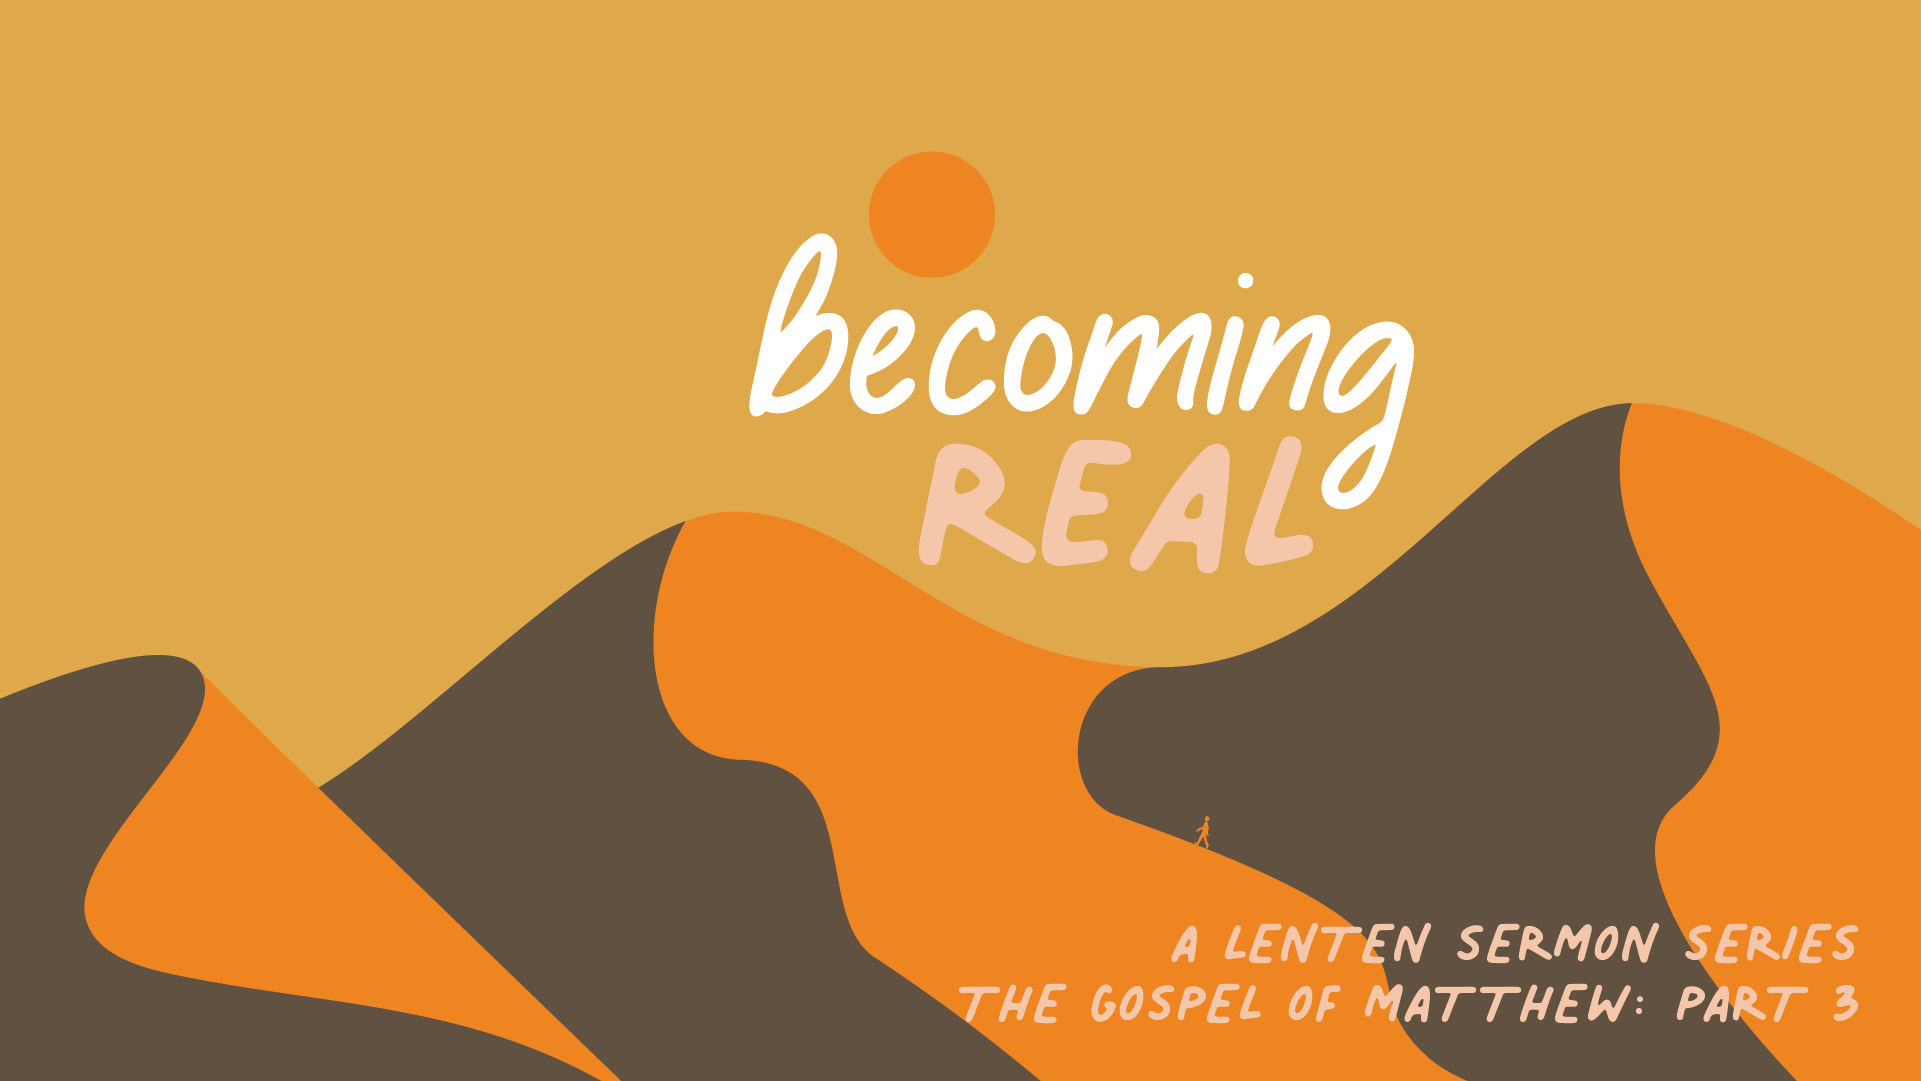 Introduction to "Becoming Real"